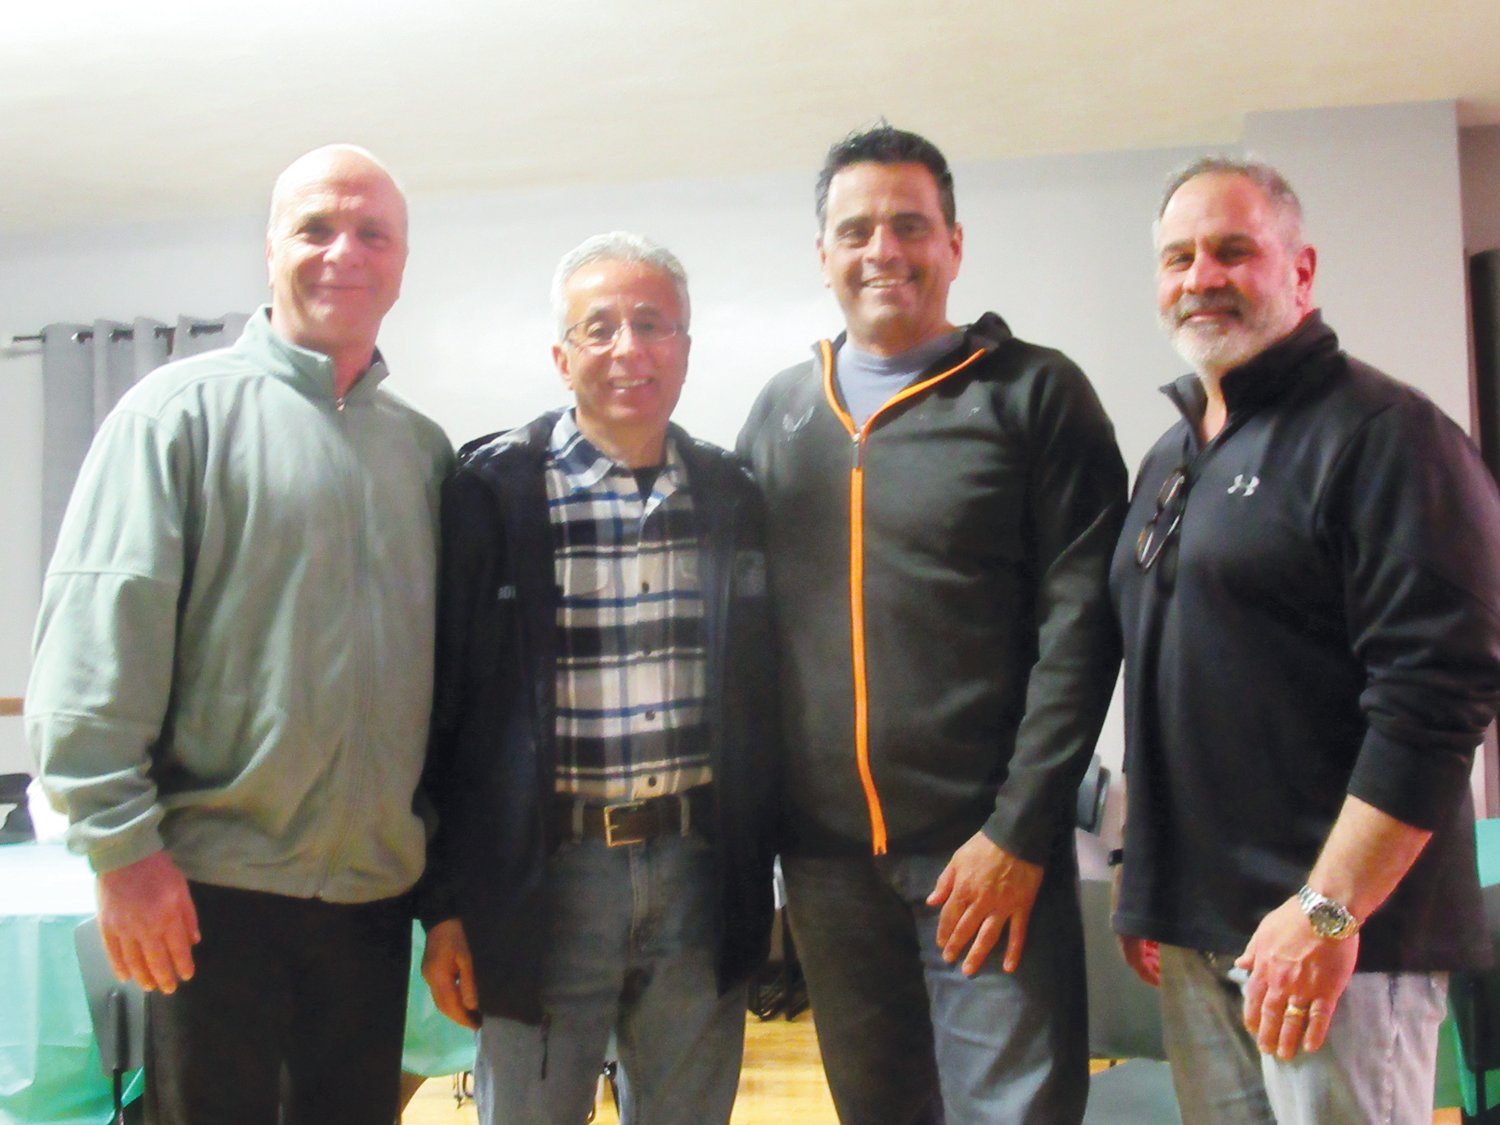 HAPPY HOST: Former State Rep. John Carnevale, who is now helping expand the Di Fesa Society expand its programs and facility, welcomes Johnston Town Council President Robert V. Russo, School Committee Chairman Bob LaFazia and Vice Chairman Joe Rotella to last week’s JDTC reorganizational meeting.